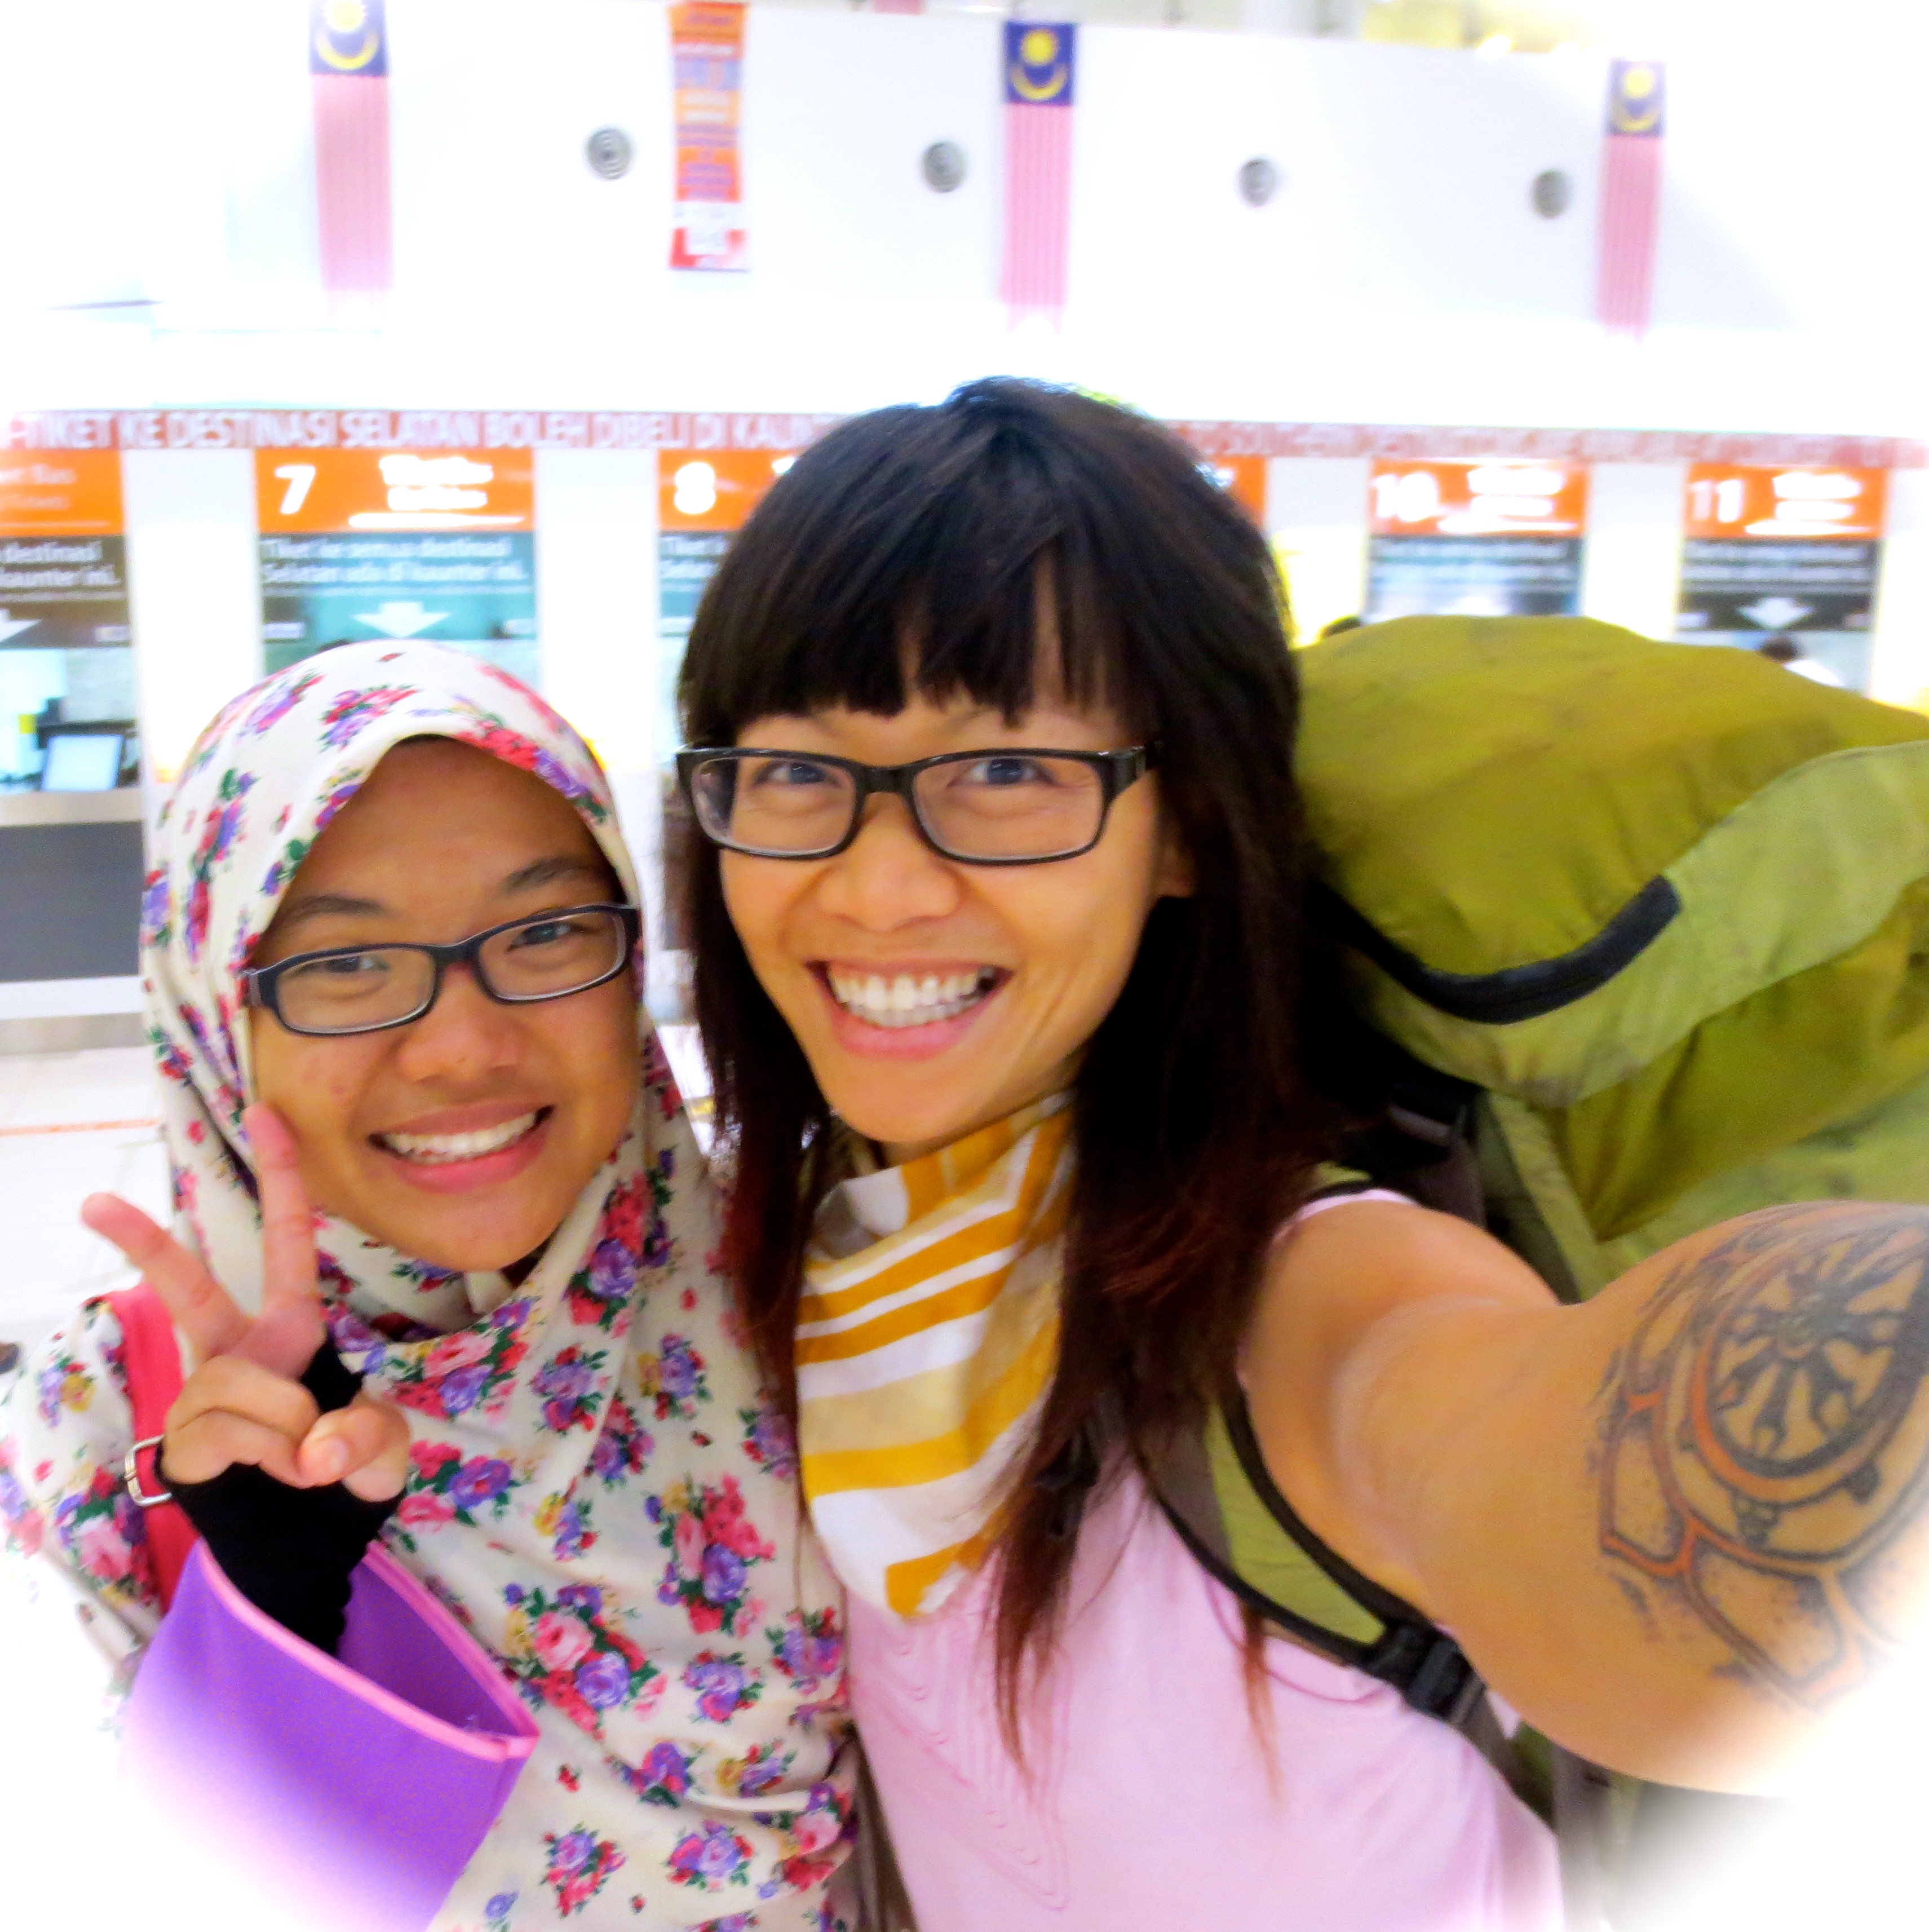 After becoming fast friends at the bus station, we exchanged buttons! Muslims are one of the friendliest and most hospitable groups of people I always encounter wherever I go, even if it's in MALAYSIA.